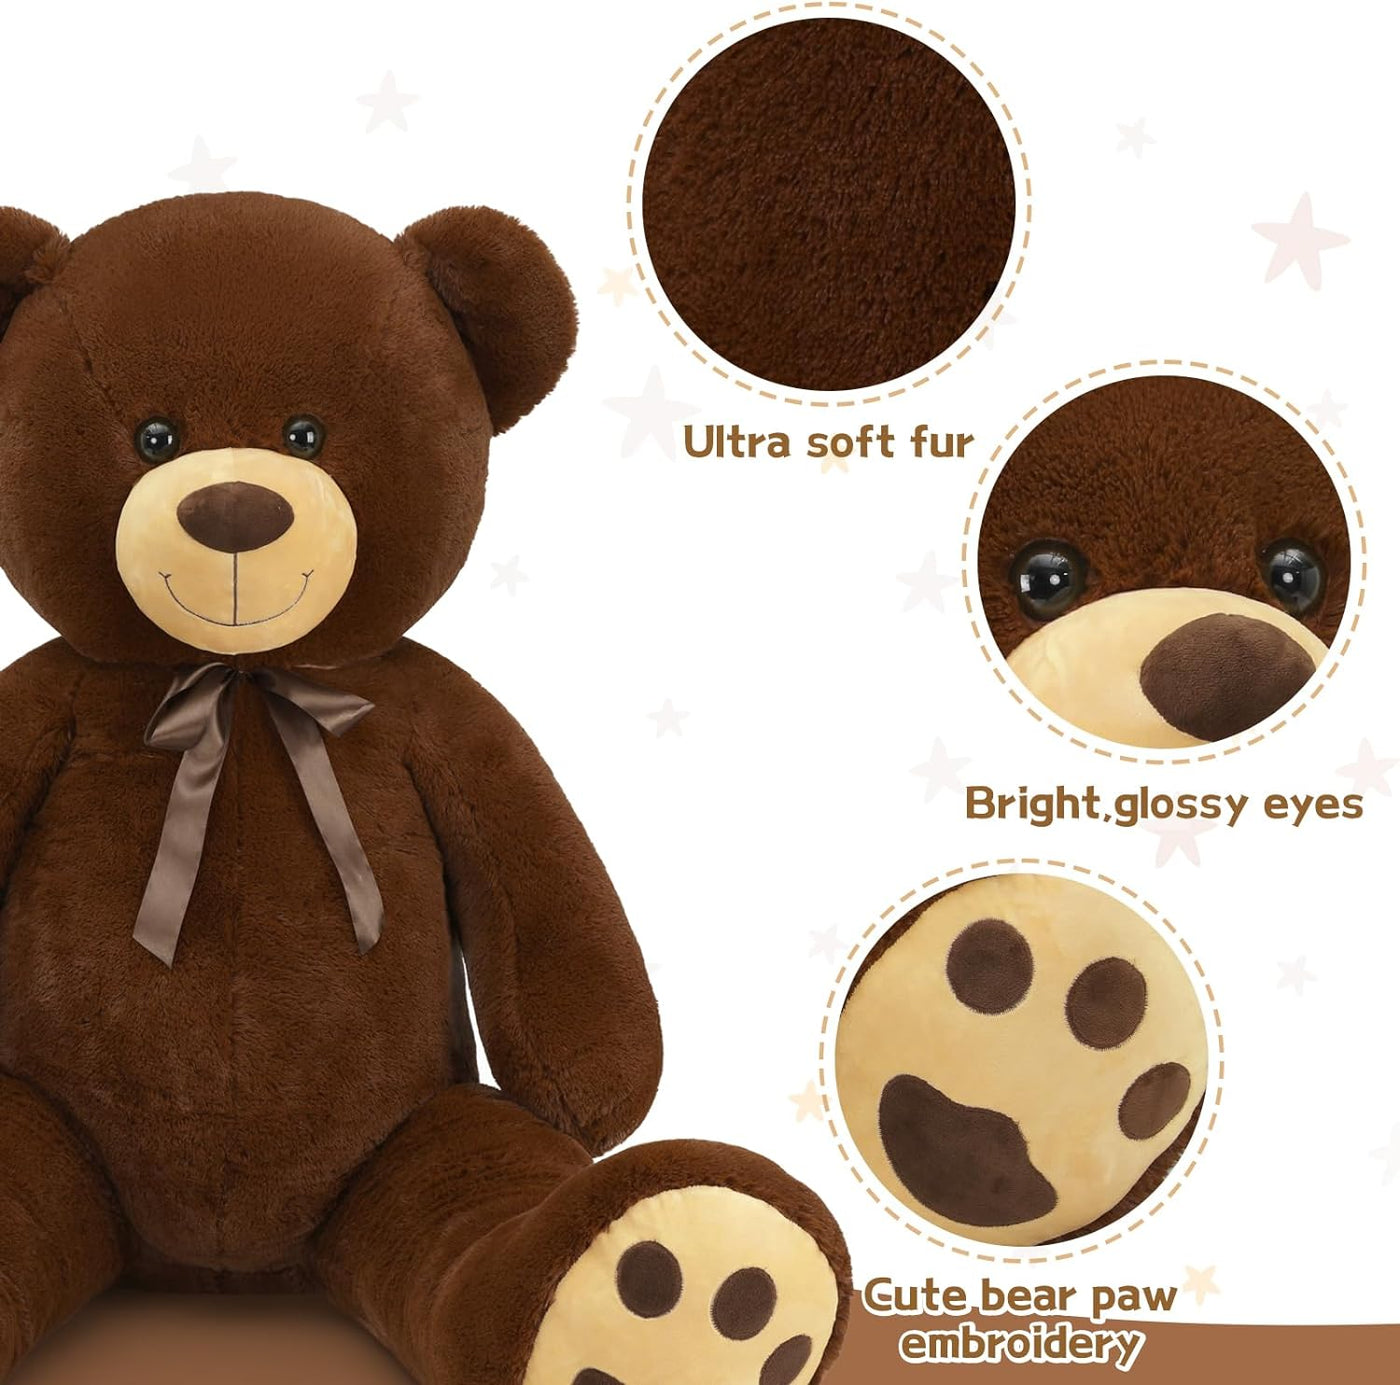 Giant Teddy Bear Stuffed Toy, Multicolor, 59 Inches